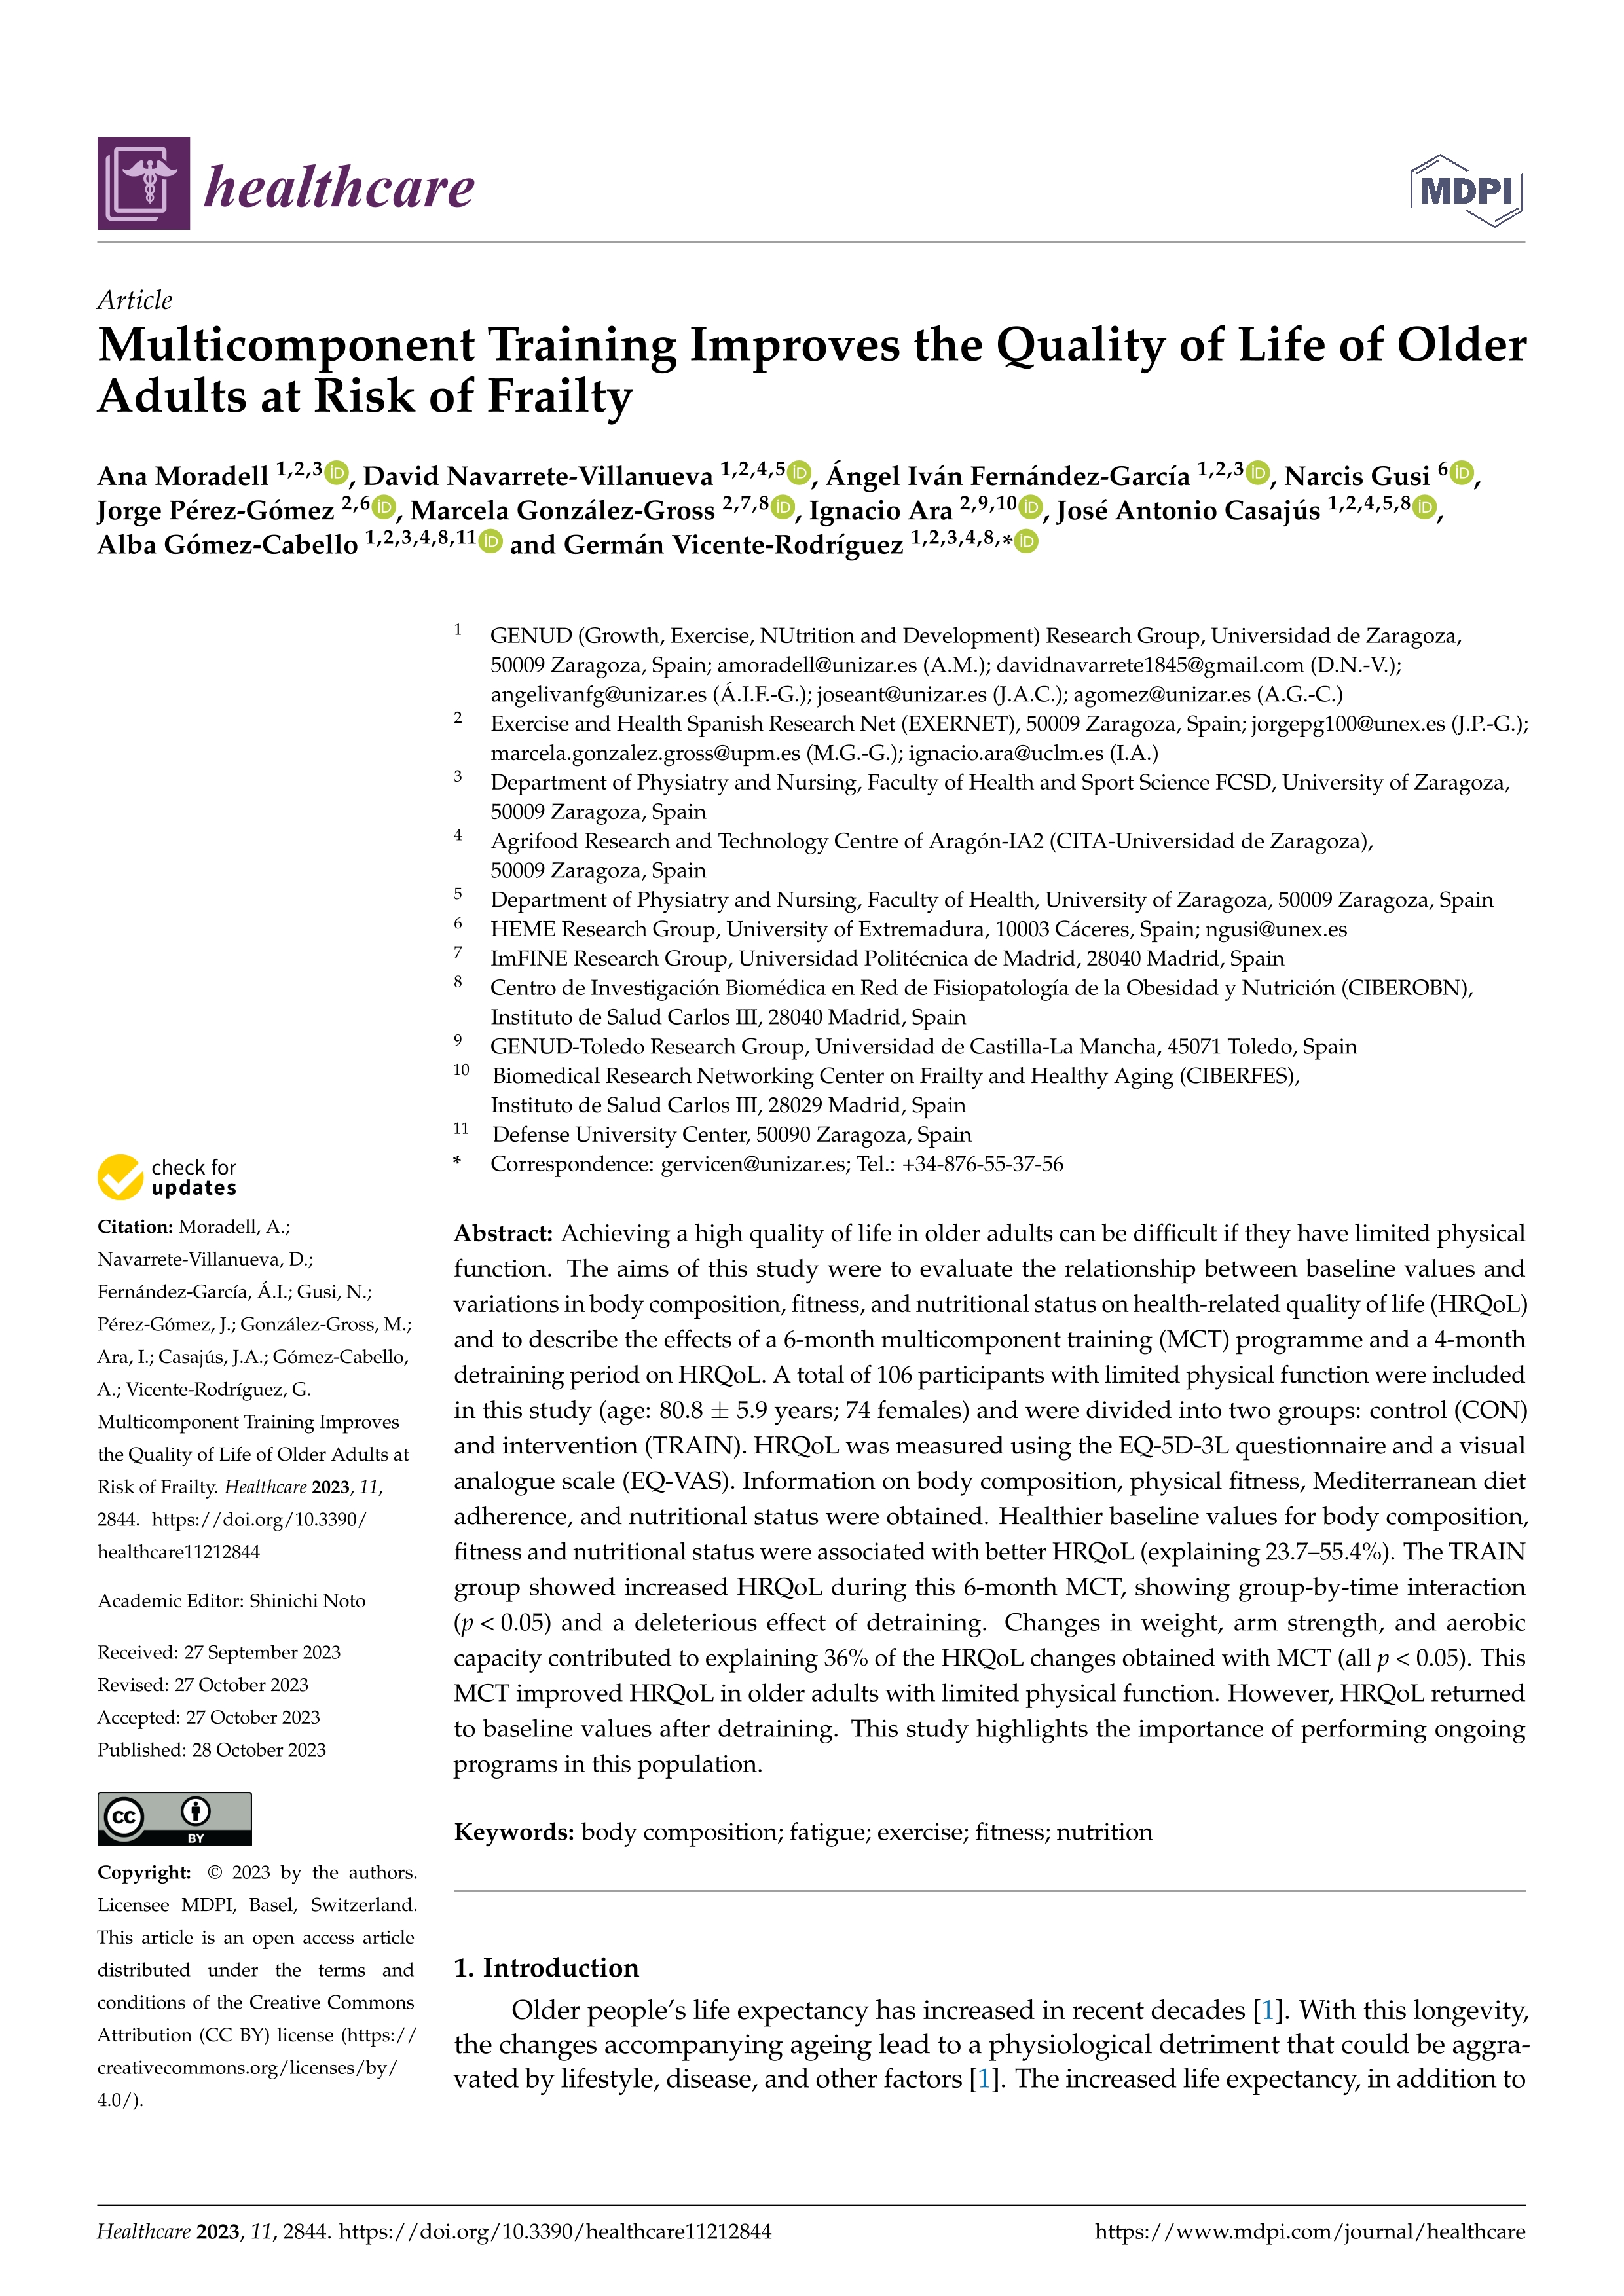 Multicomponent training improves the quality of life of older adults at risk of frailty